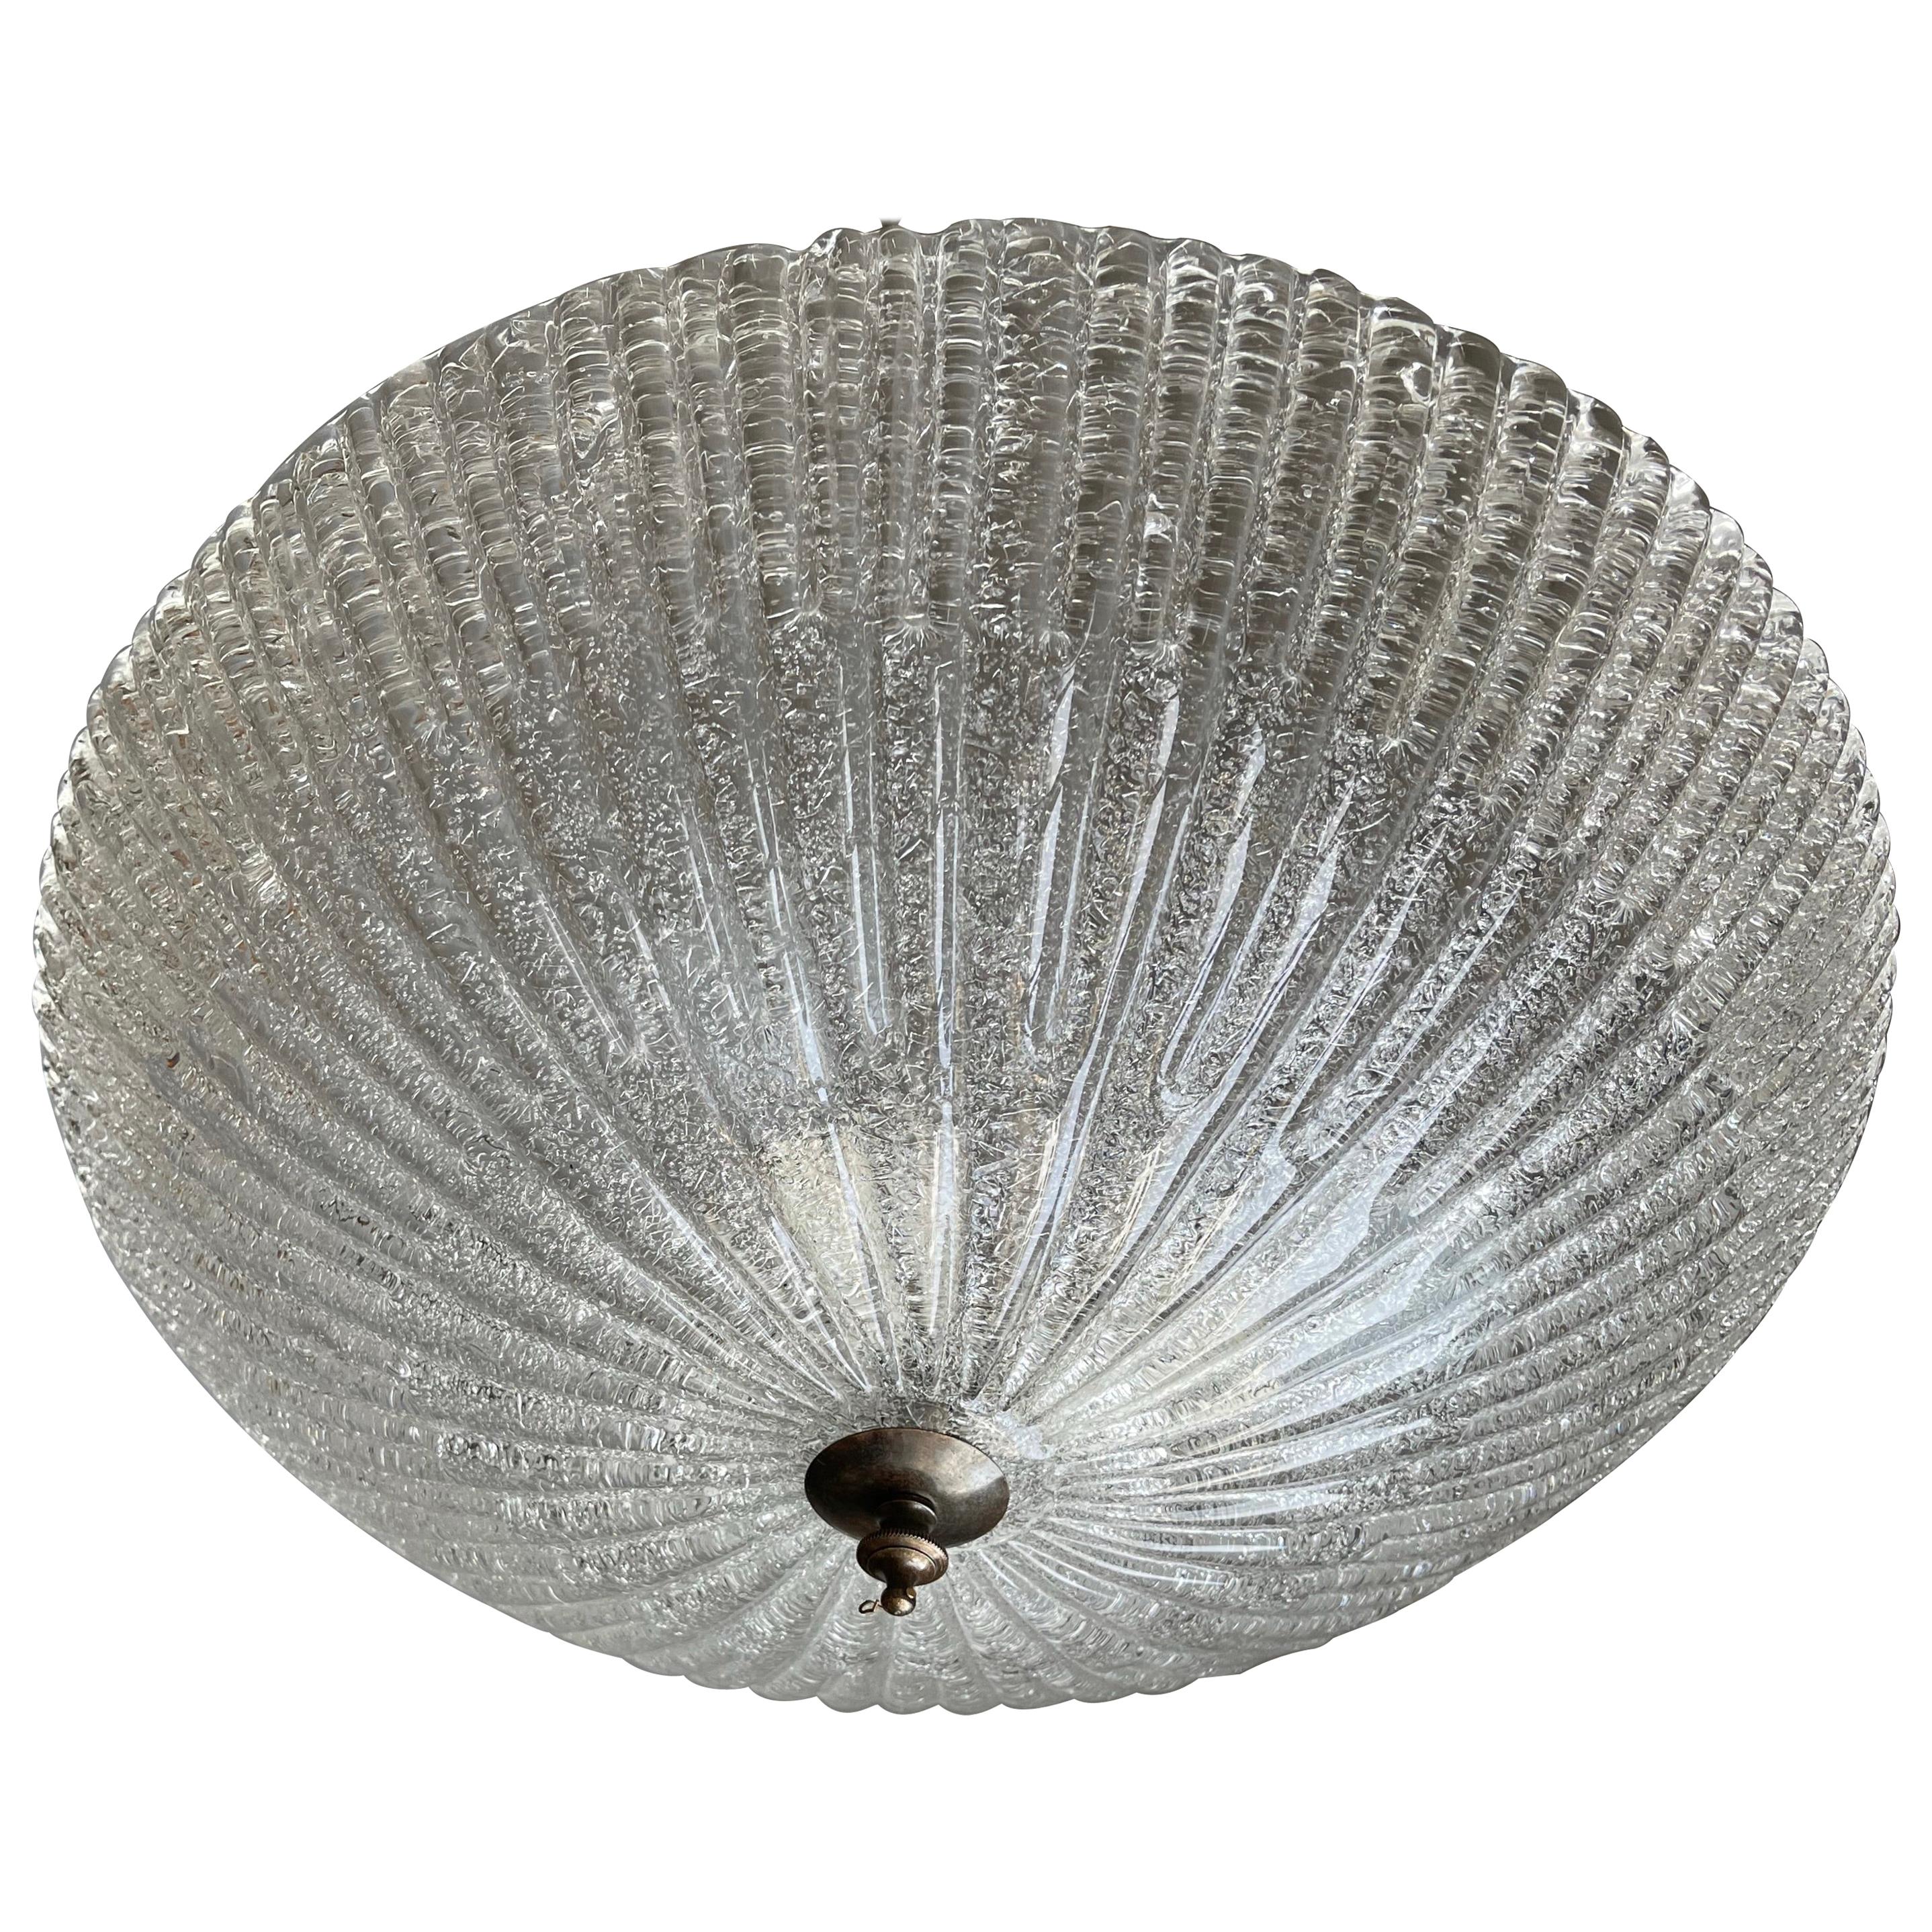 Large and Fine Mid-Century Italian Murano Glass Art Flushmount / Ceiling Fixture For Sale